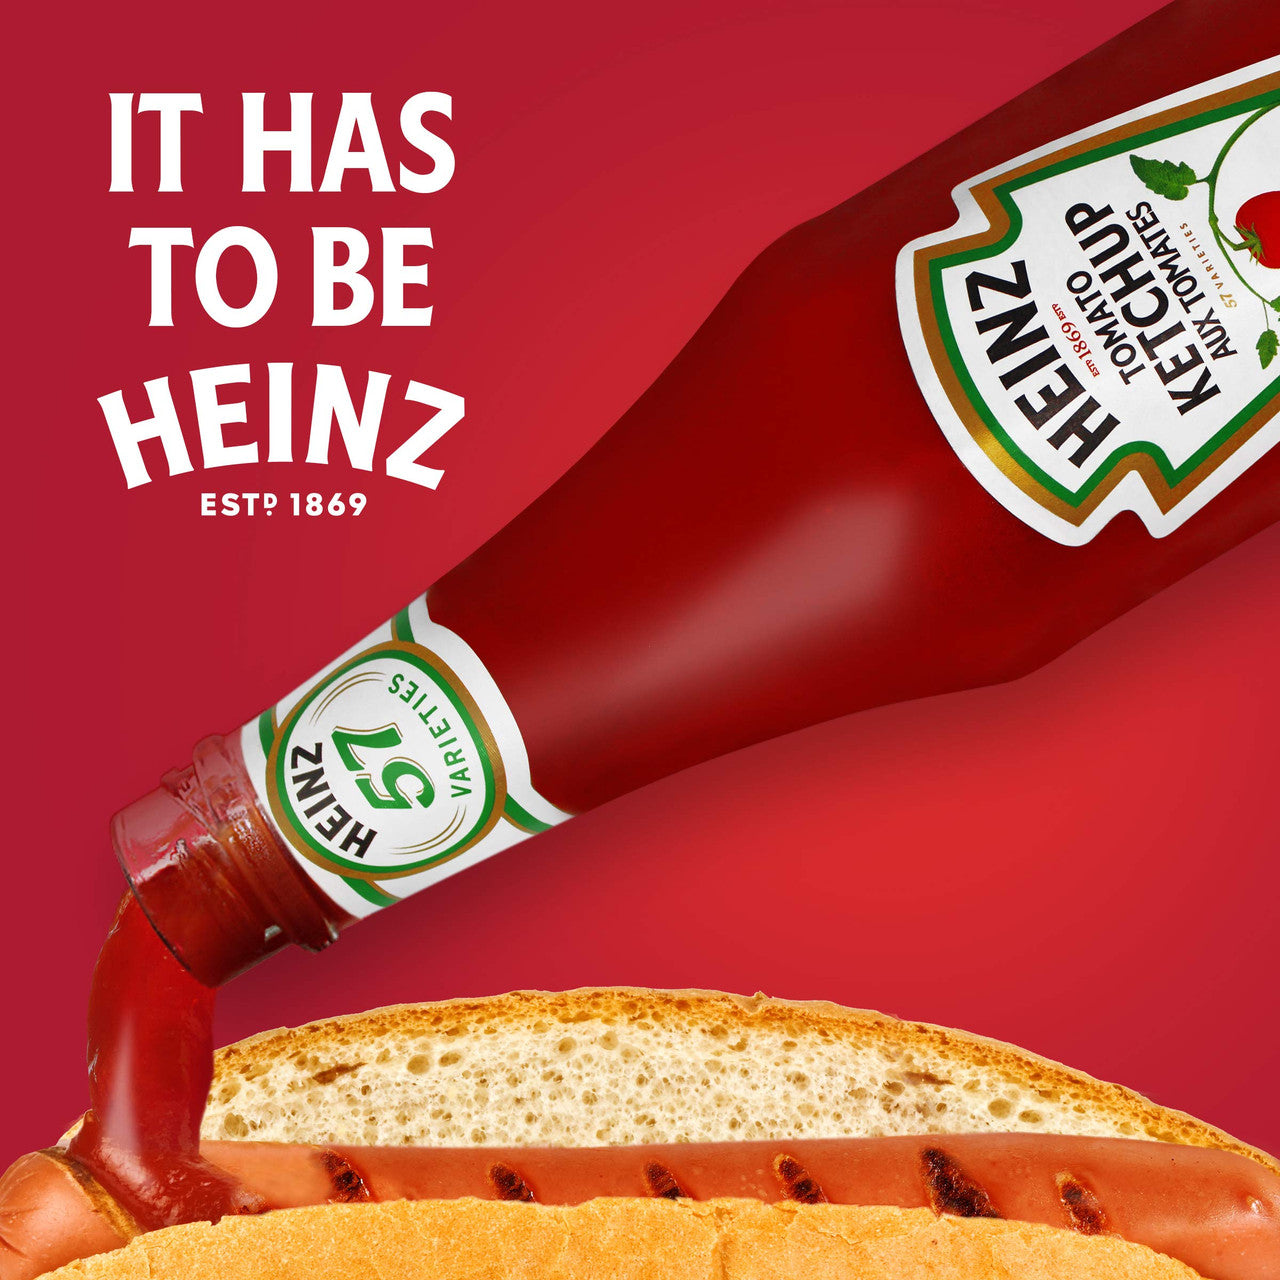 HEINZ Ketchup Fridge Fit-2 Pack, 2.5l/84.56Fl. oz. {Imported from Canada}